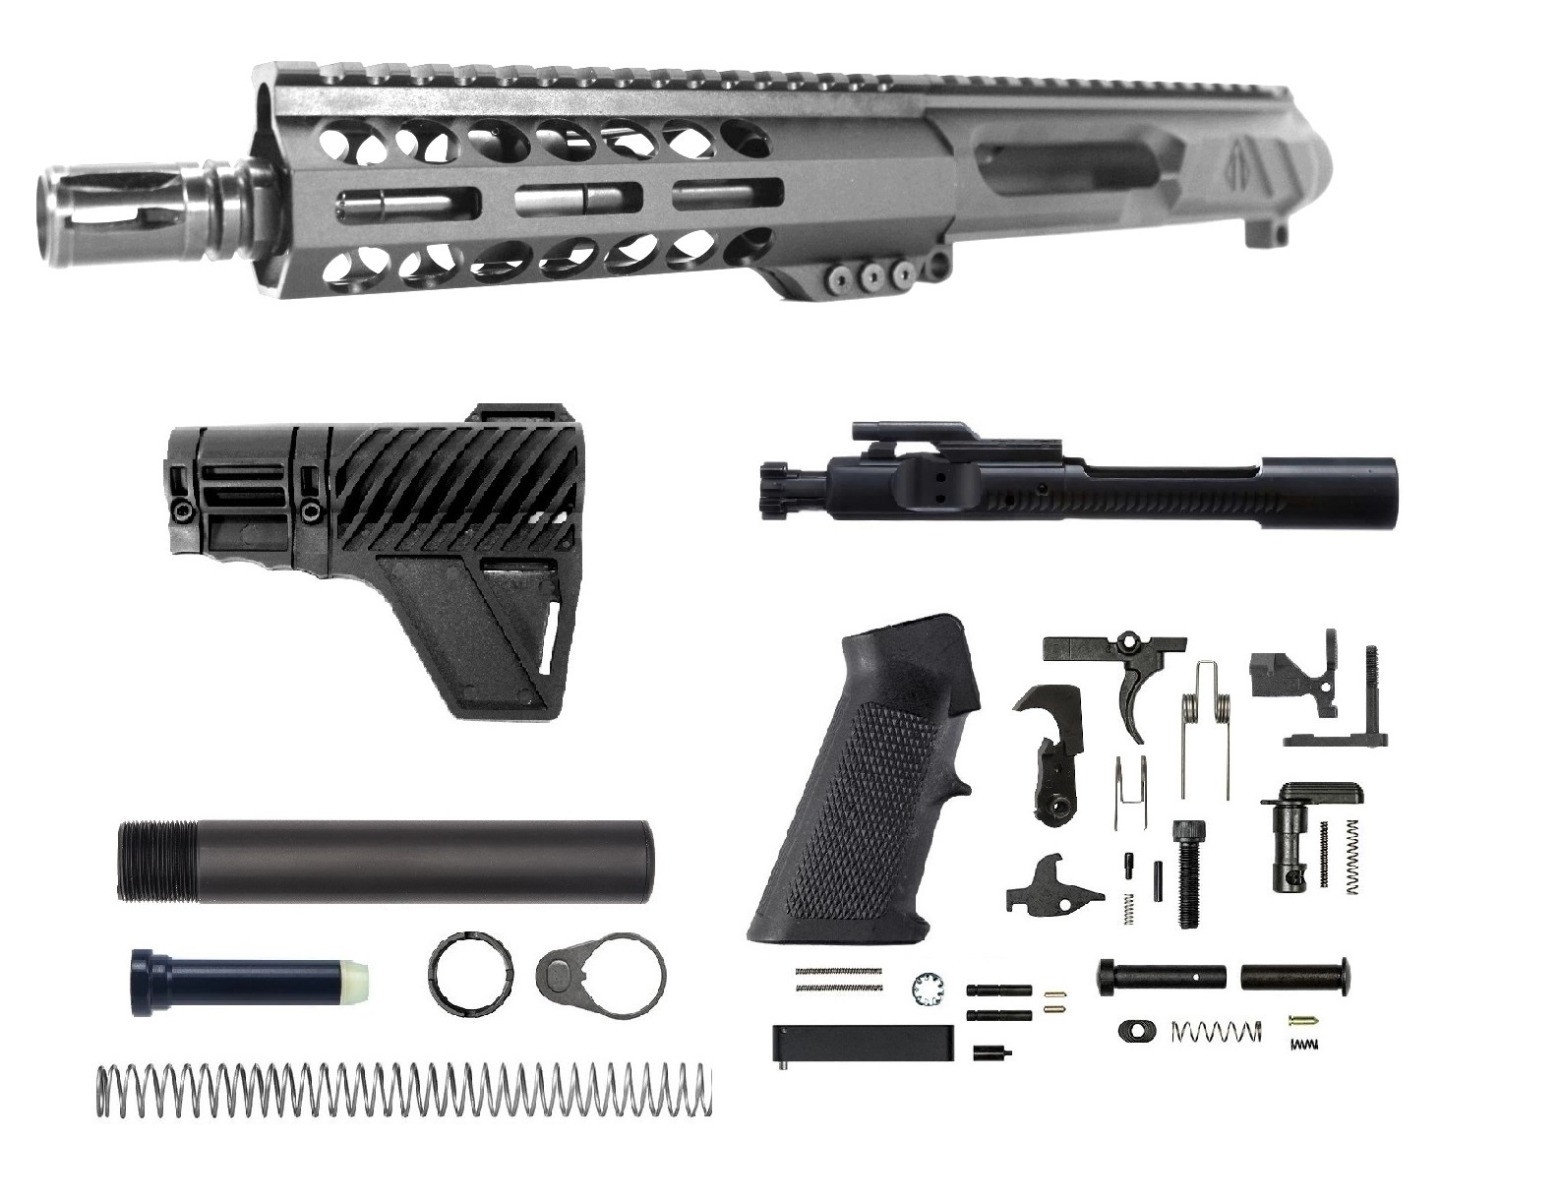 7.5 inch AR-15 LEFT HANDED Non Reciprocating Side Charging 300 Blackout Melonite Upper Complete kit | 100% USA MADE